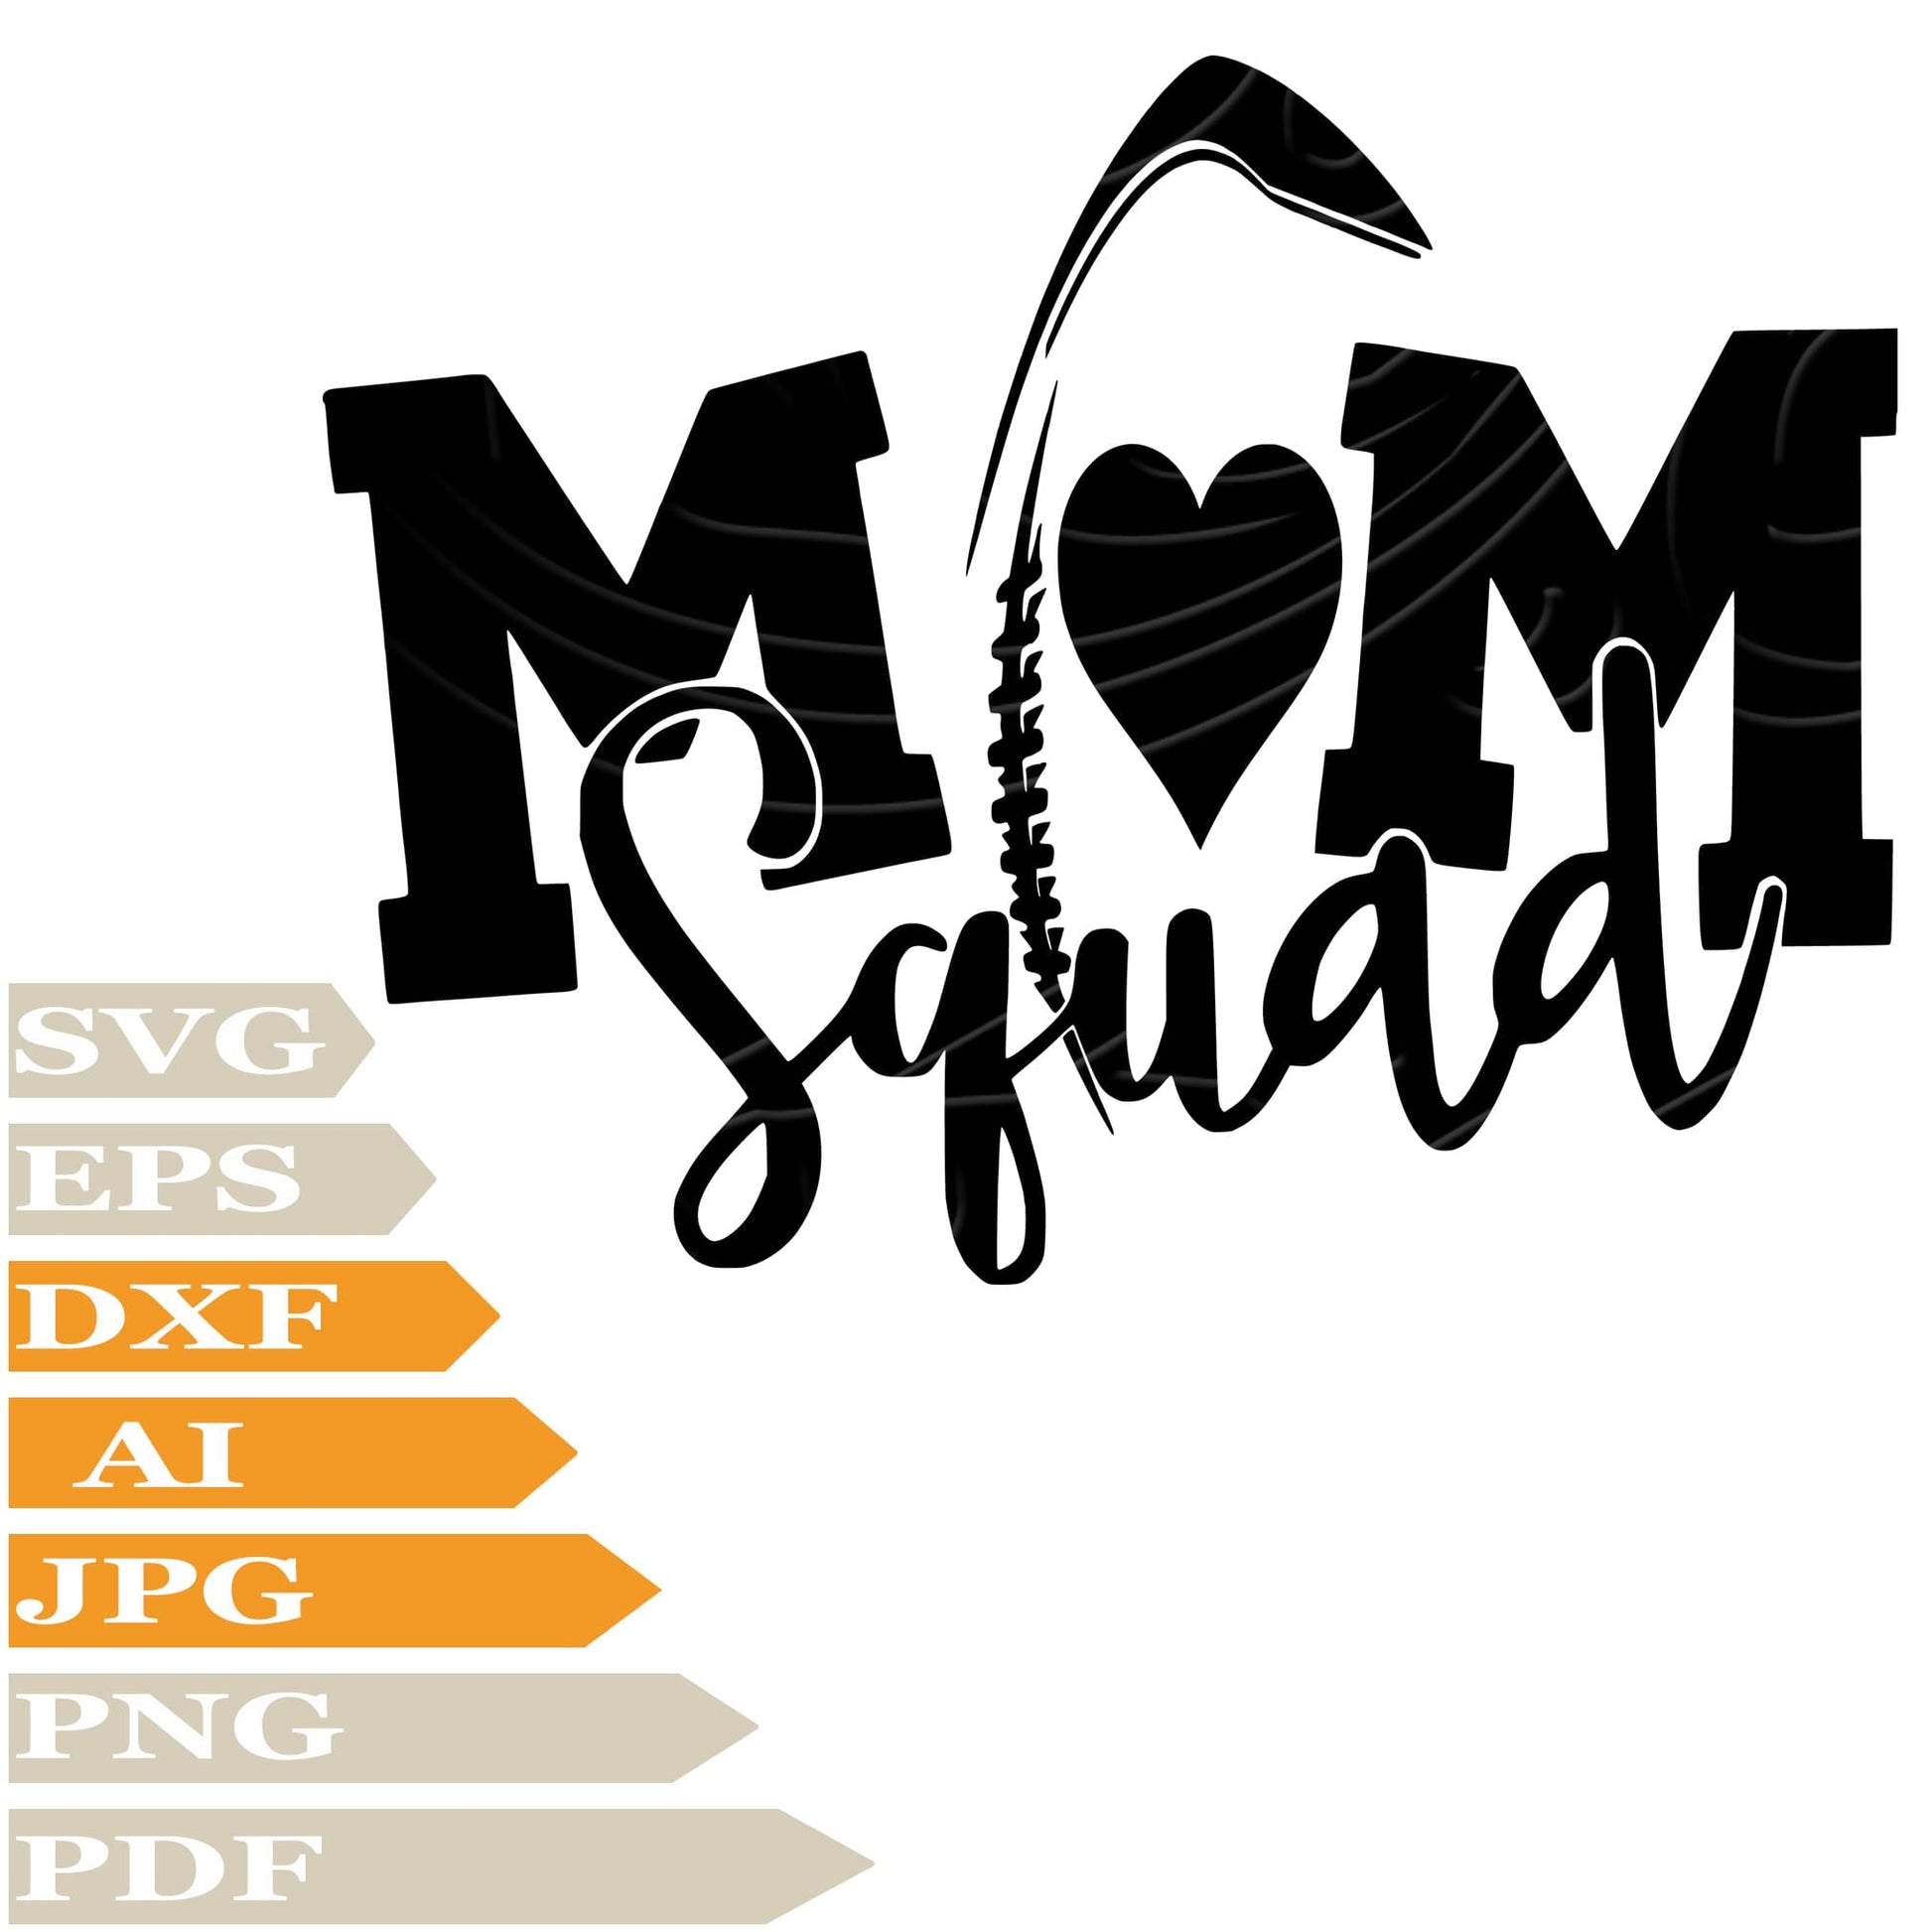 Mom Squad ﻿SVG, American Football SVG Design, Mom Squad Heart Personalised SVG, Mom Squad PNG, Mom Squad Vector Graphics, Mom Squad Heart For Cricut, Digital Instant Download, Clip Art, Cut File, For Shirts, SilhouetteAmerican